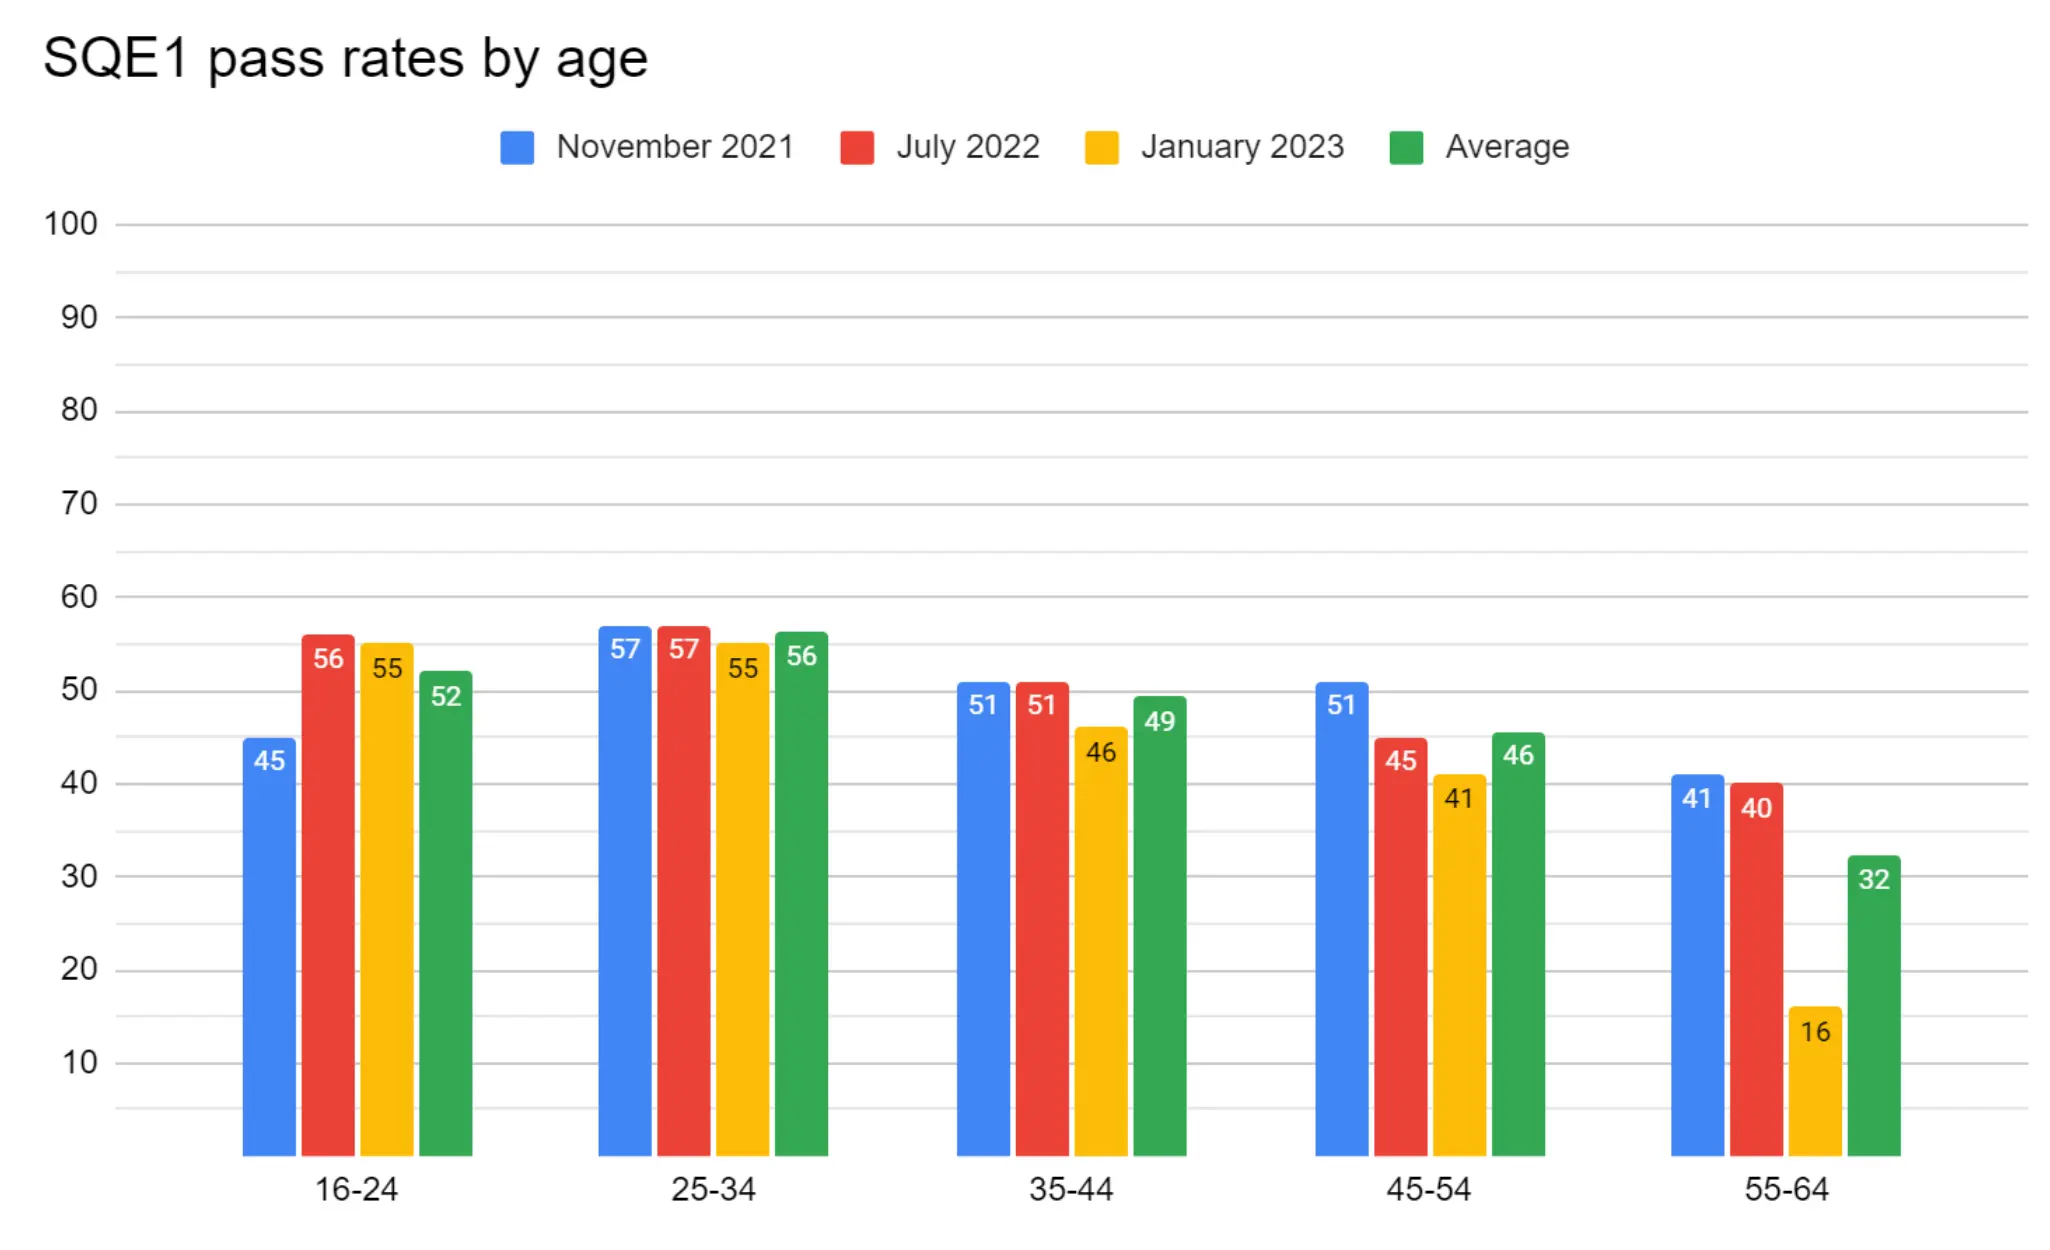 SQE1 pass rates - does age matter?